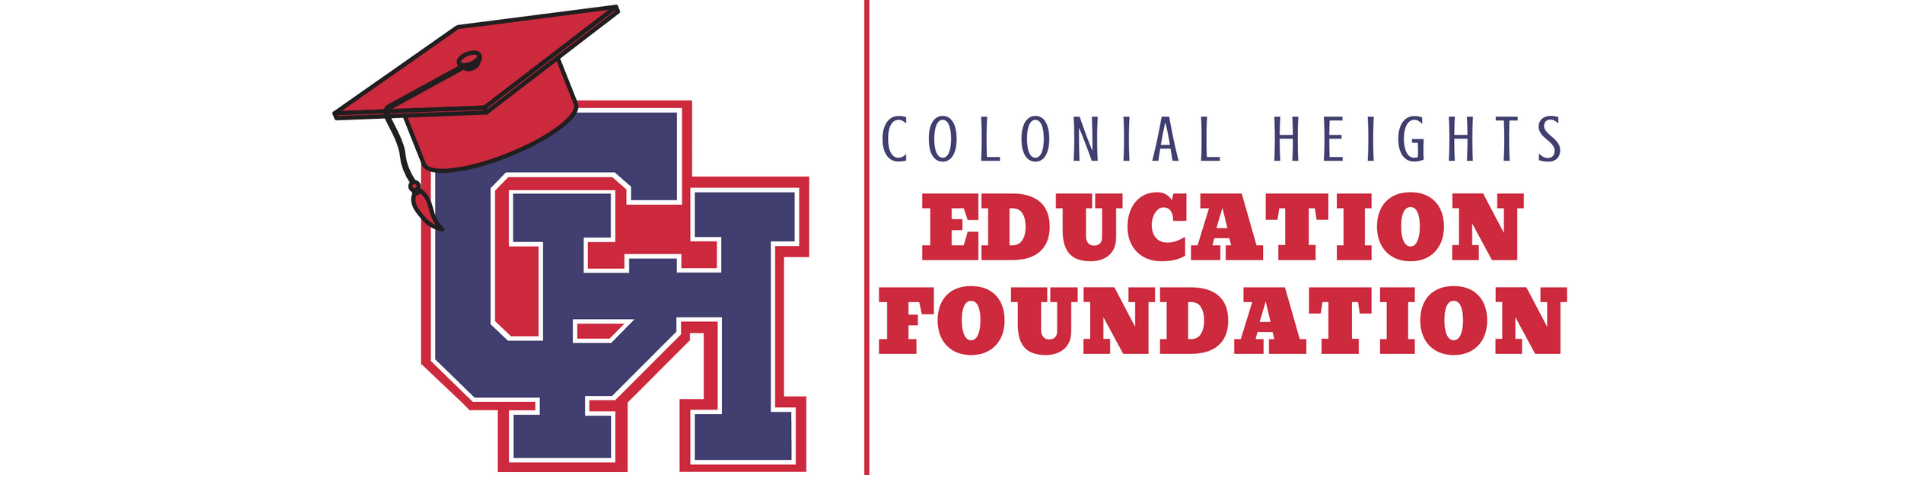 Colonial Heights Education Foundation logo